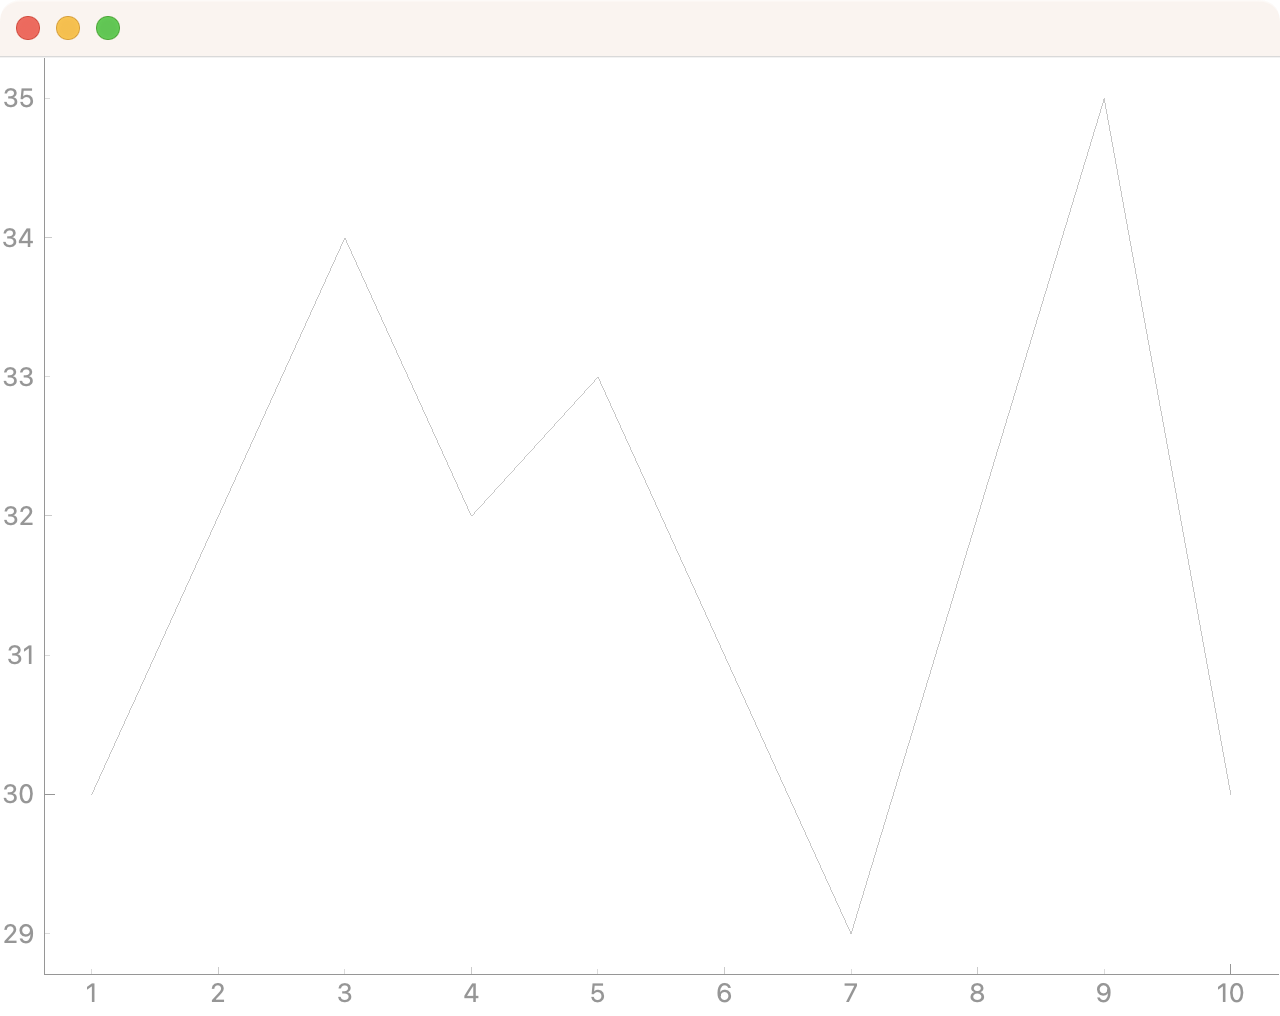 PyQtGraph plot with a white background